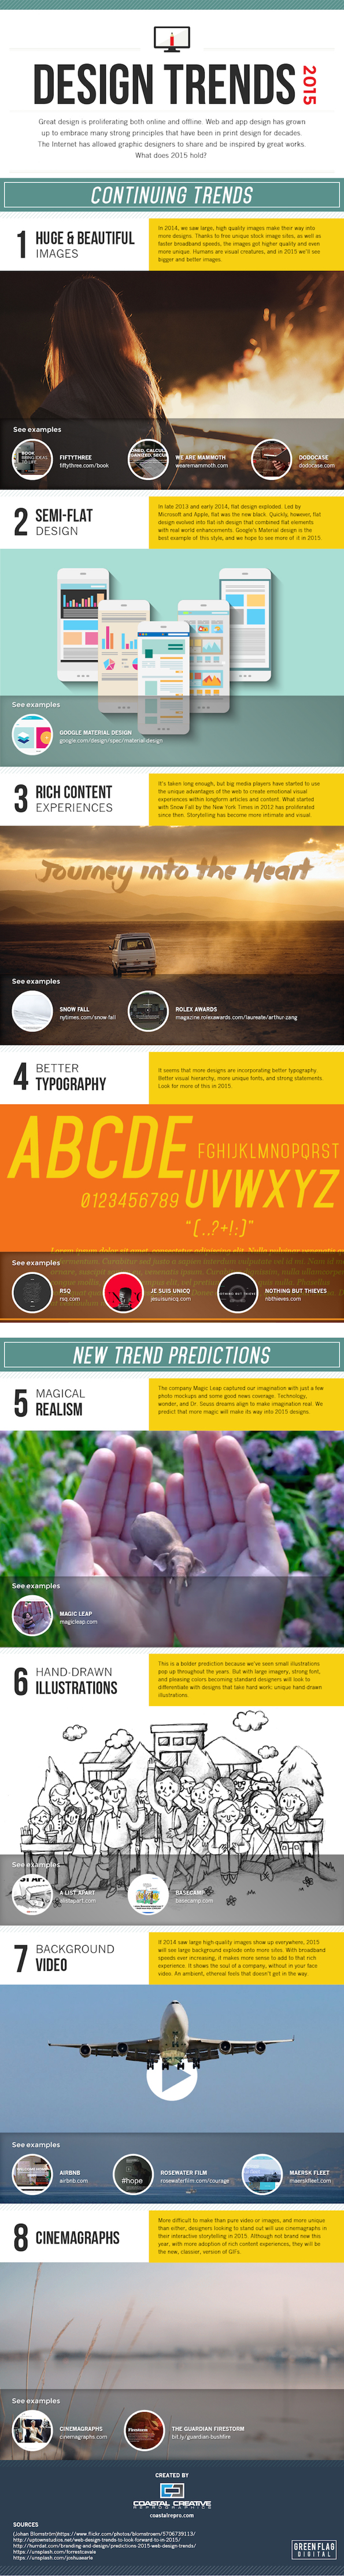 Marketing Design Trends for 2015 Infographic image